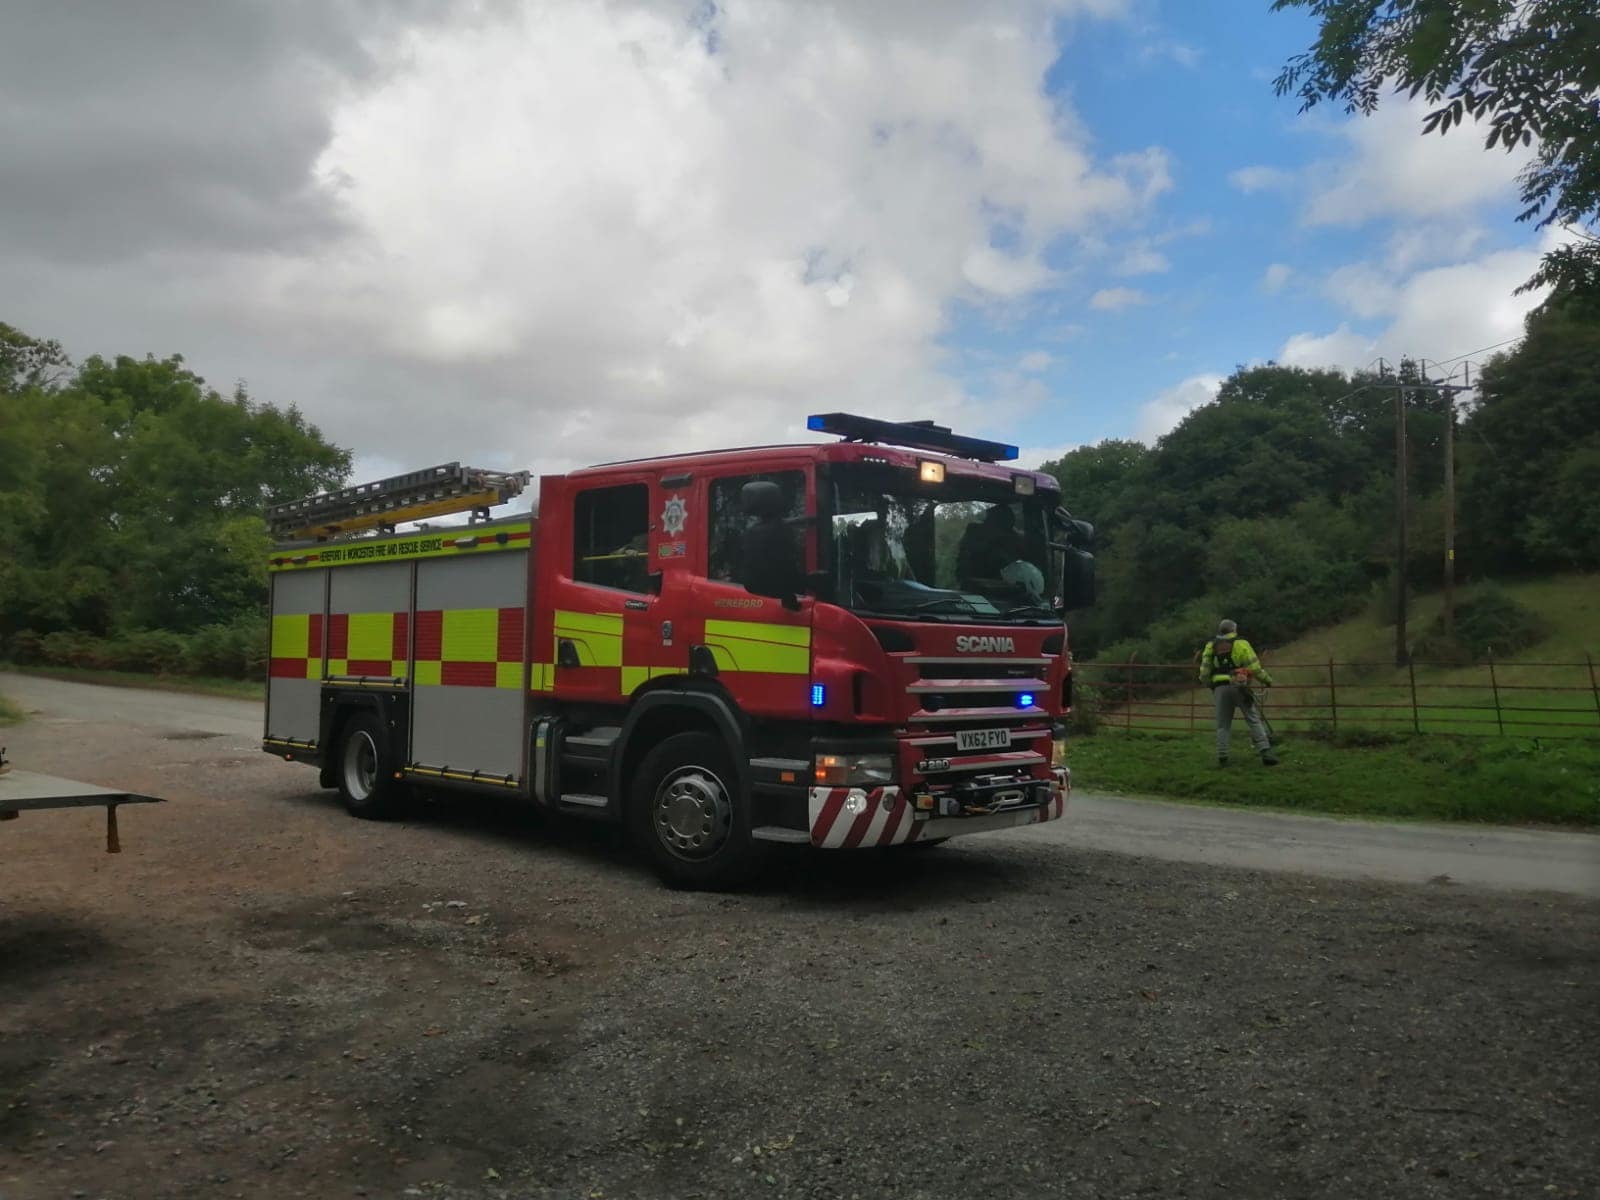 Firefighters had to be called after the tree was set on fire. Picture: Dormington and Mordiford Parish Council